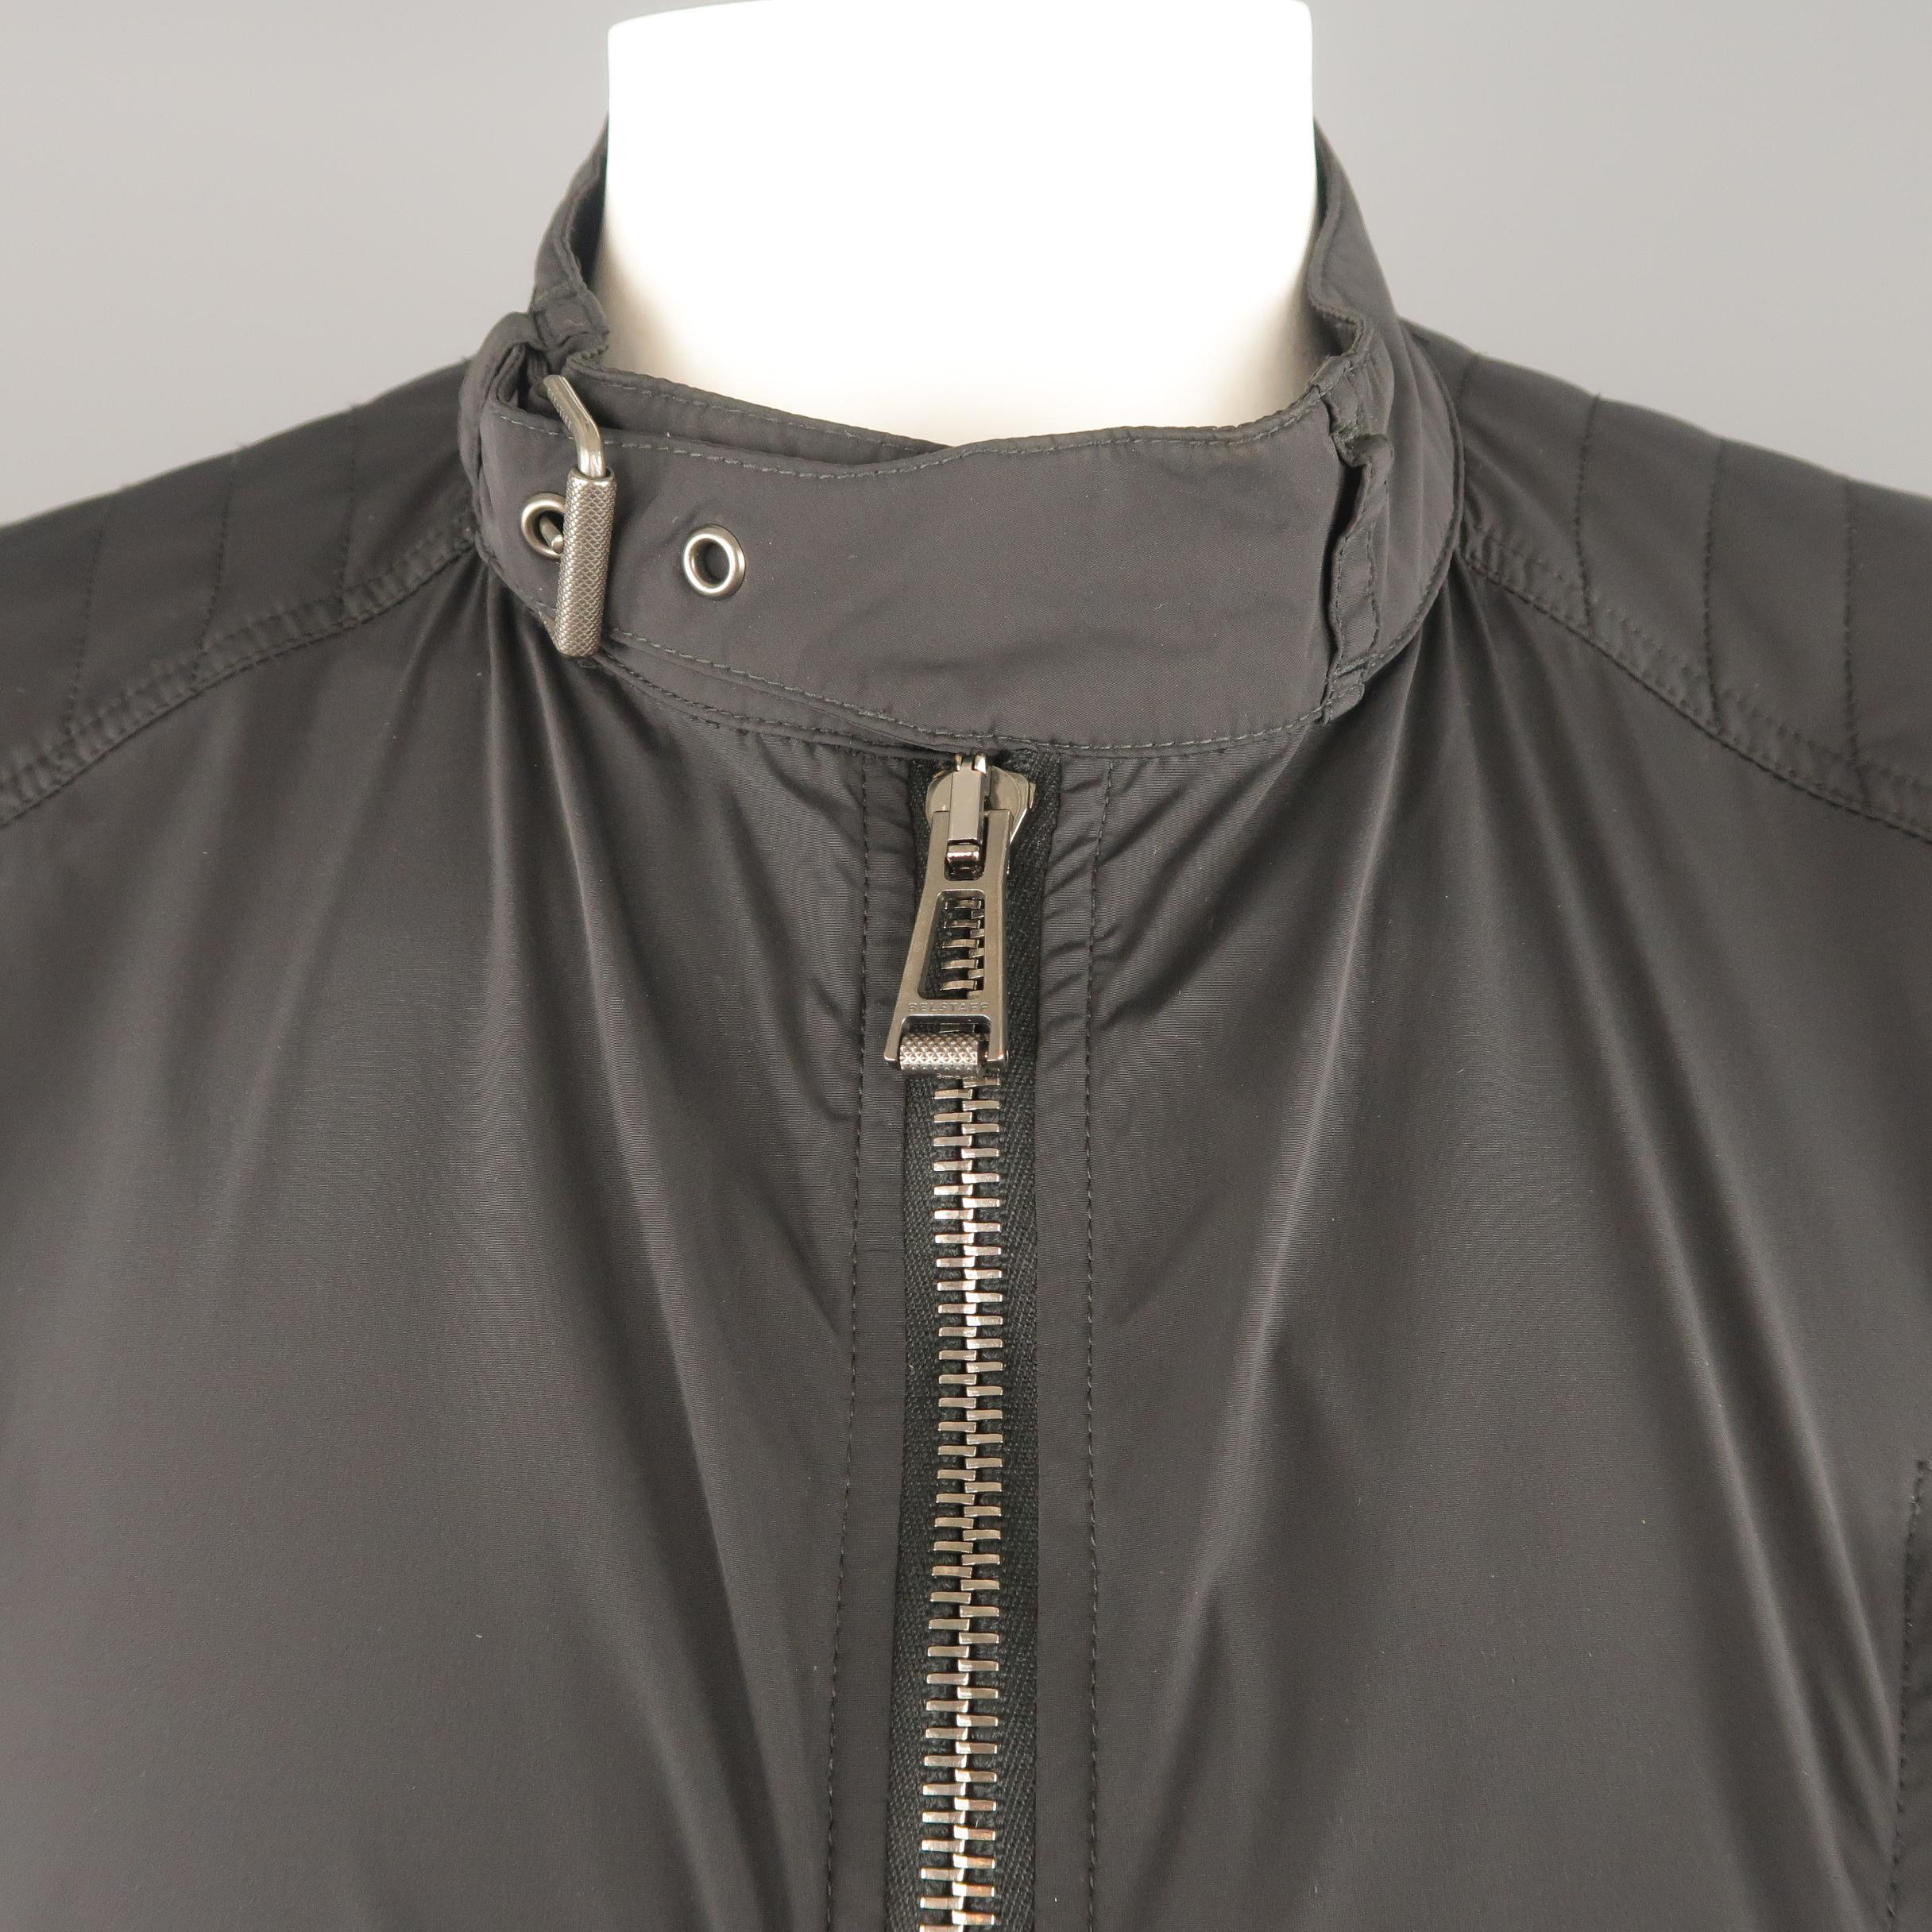 BELSTAFF jacket comes in black nylon with a band belt collar, double zip front, and zip pockets. Made in Romania.
 
Very Good Pre-Owned Condition.
Marked: IT 54
 
Measurements:
 
Shoulder: 19 in.
Chest: 44 in.
Sleeve: 26 in.
Length: 27 in.